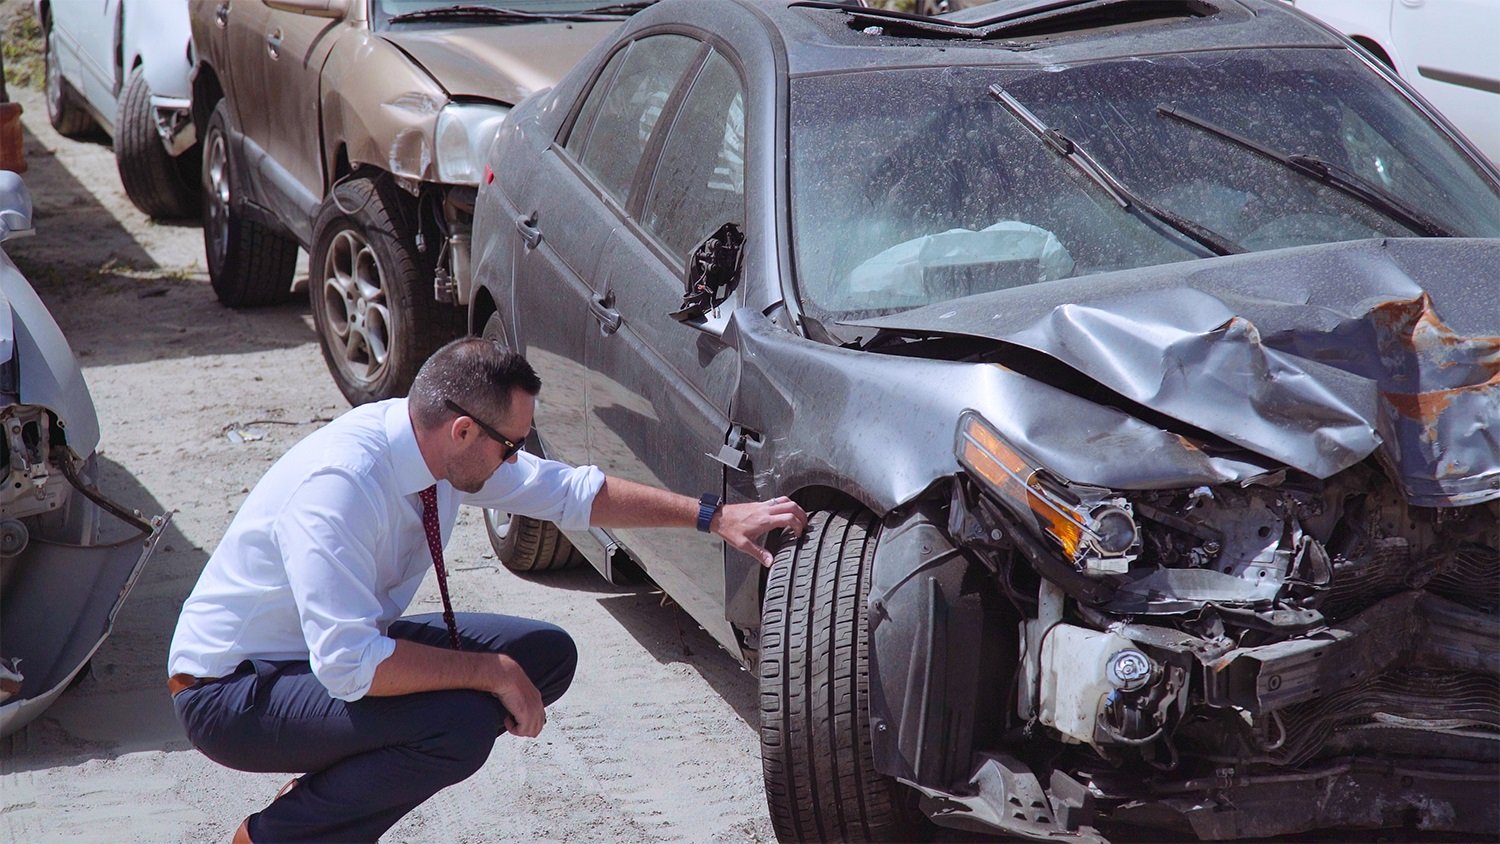 California Auto Accident Lawyer: How to Find the Right Legal Help After a Car Crash, How to Find the Right California Auto Accident Lawyer